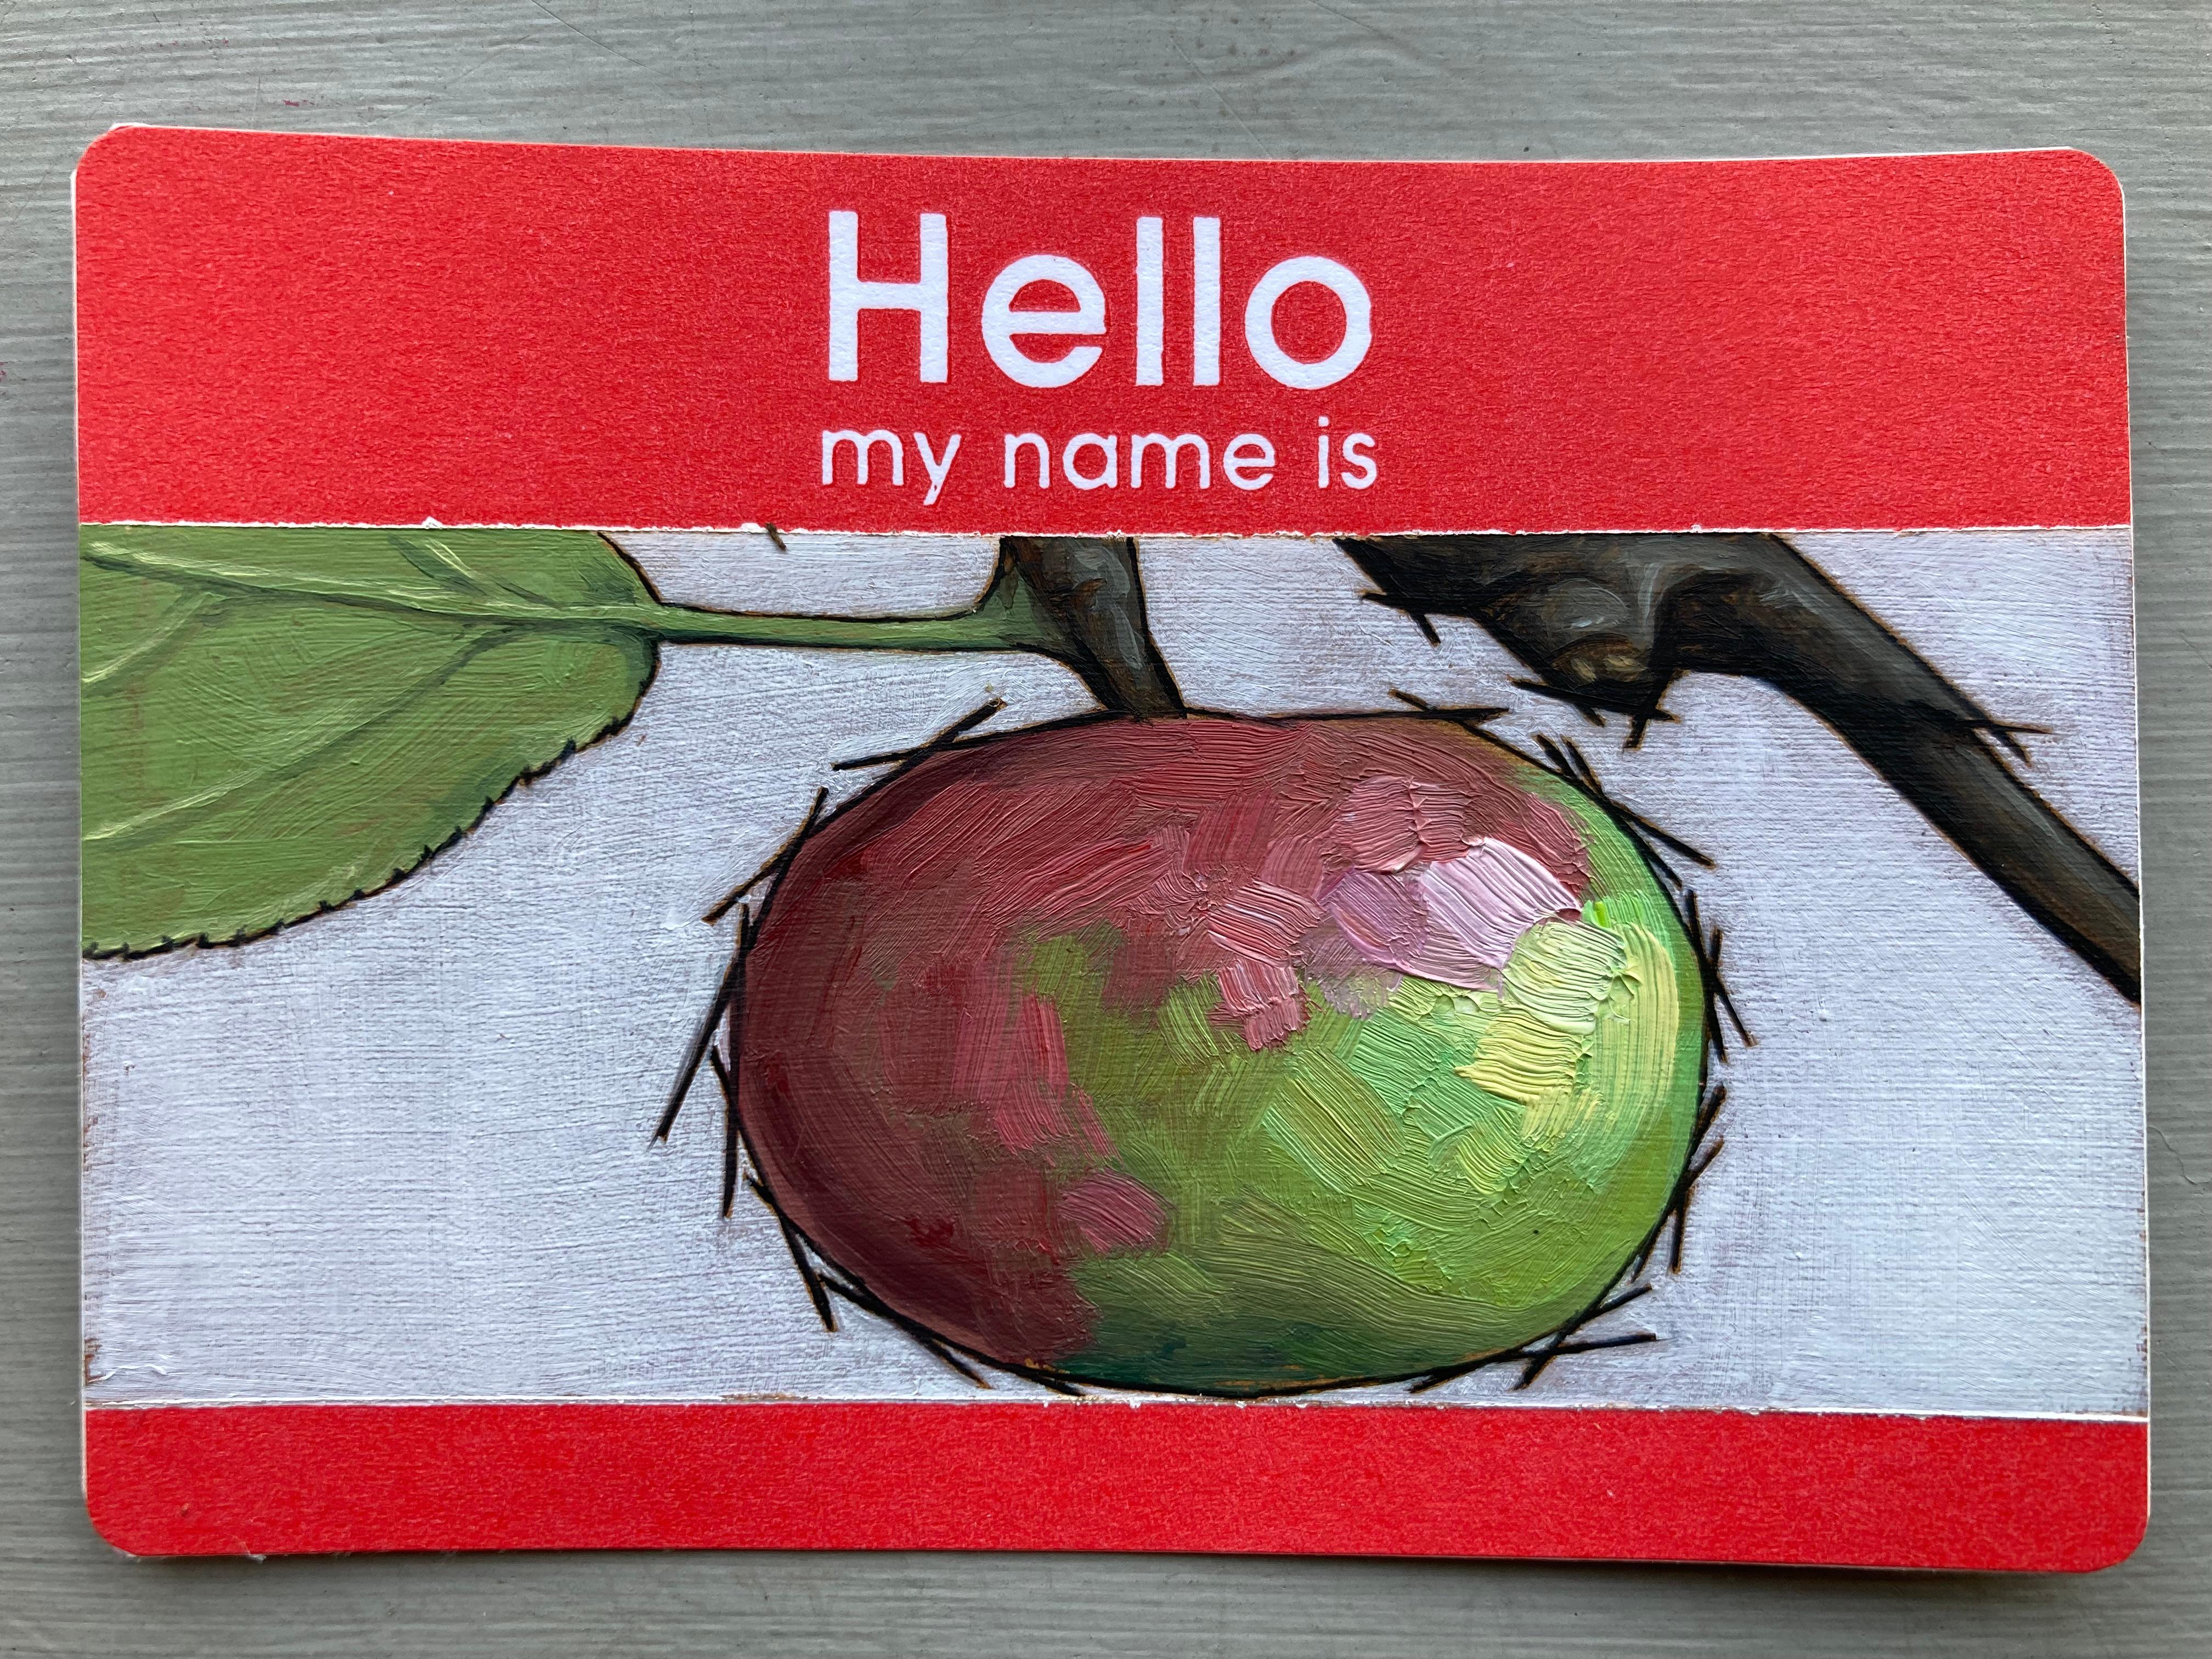 Hello, My Name Is: Crab Apple - miniature pictograph painting on paper - Photorealist Painting by Anthony Mastromatteo